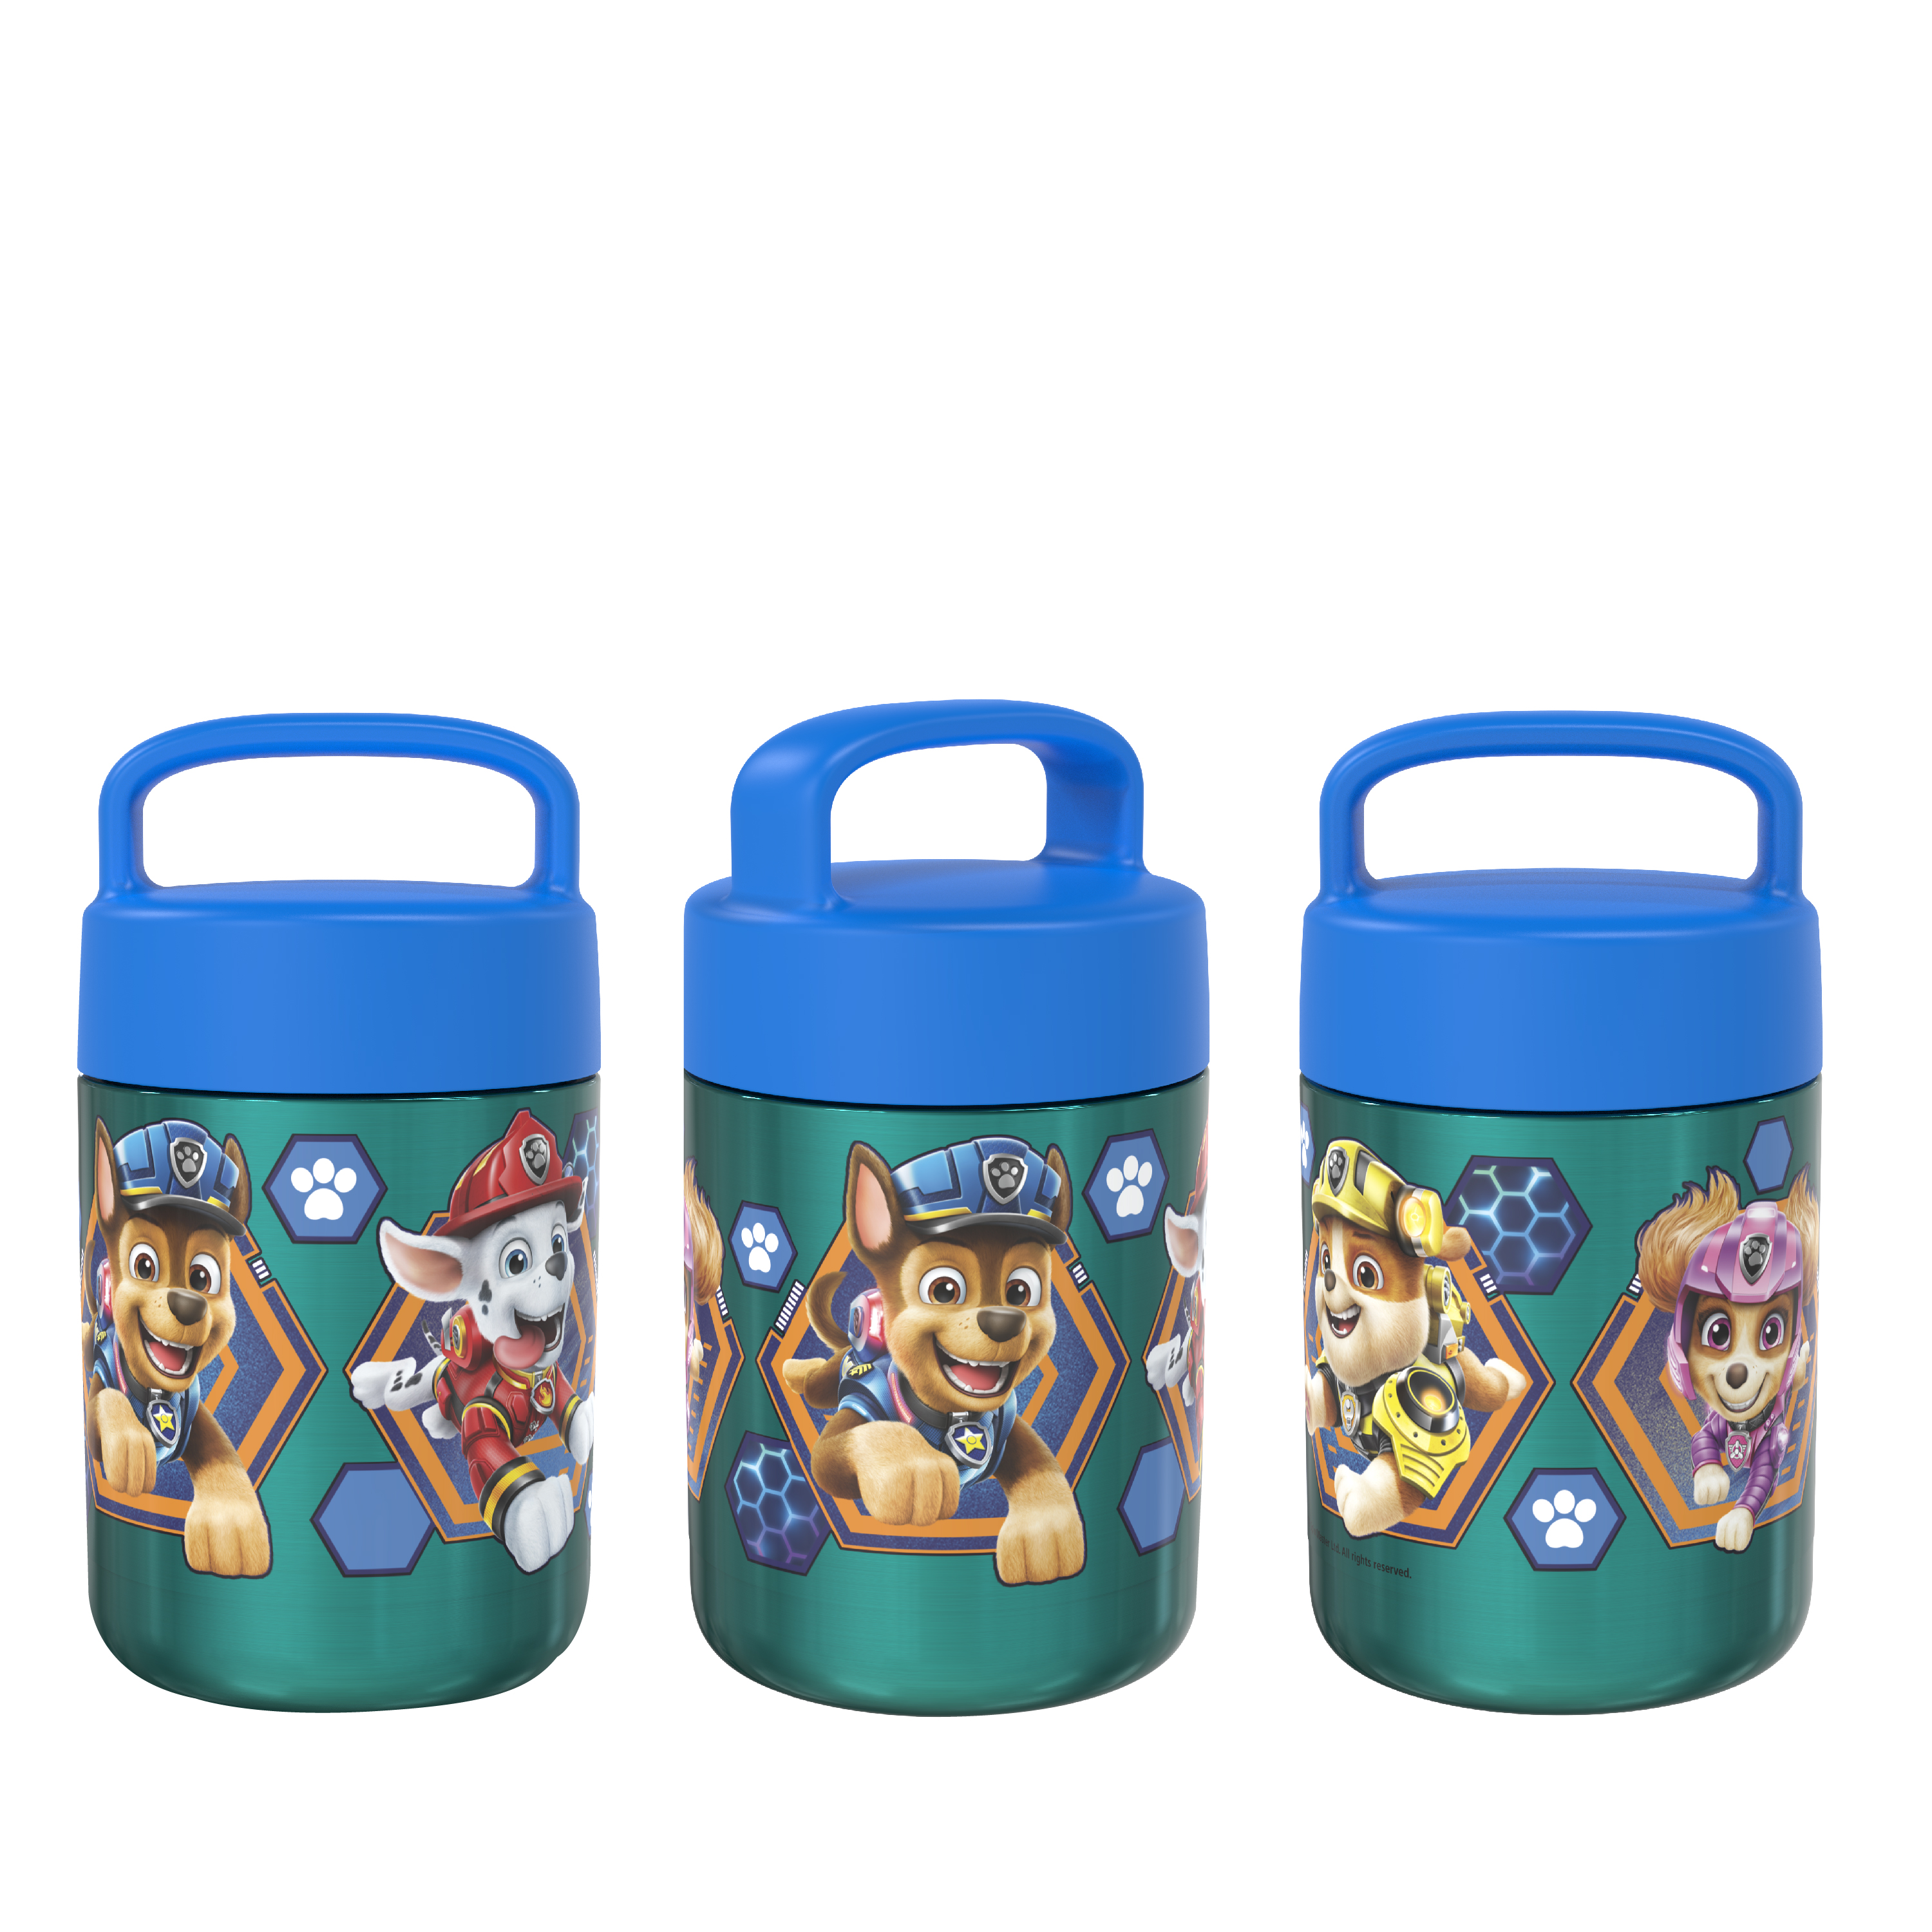 Paw Patrol Movie Reusable Vacuum Insulated Stainless Steel Food Container, Marshall, Chase and Friends slideshow image 4